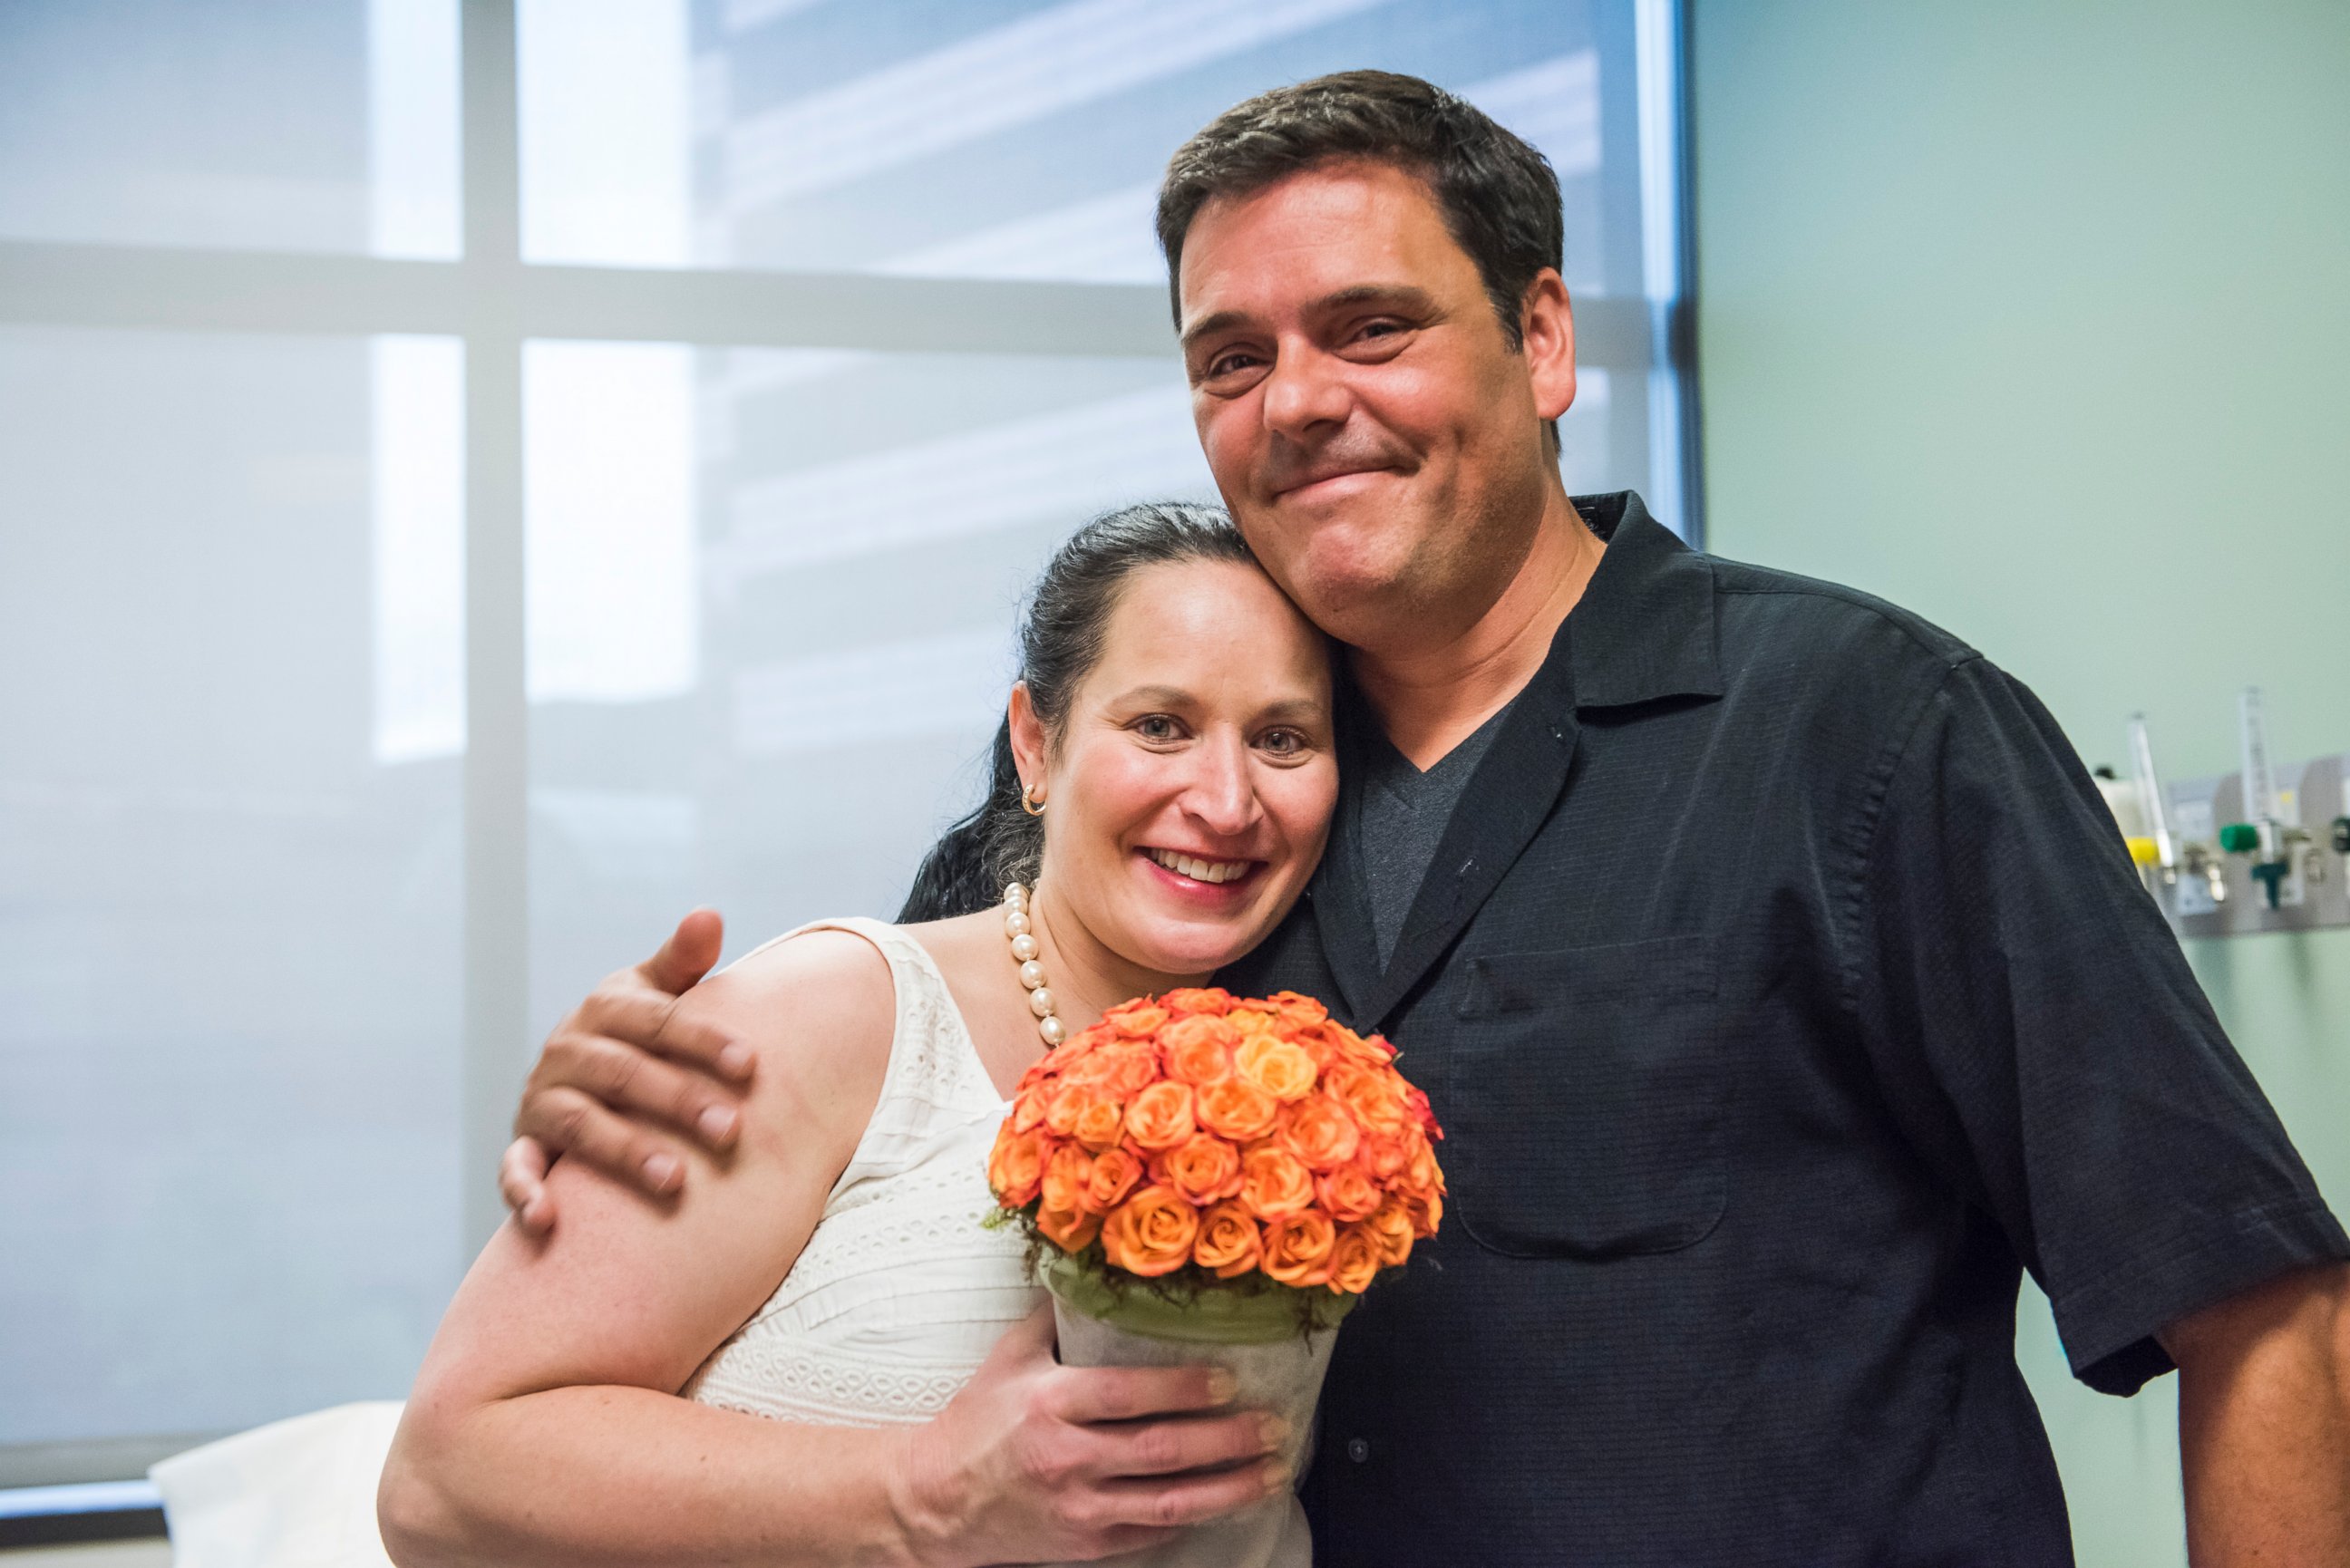 PHOTO: Stephanie Tallent and Jason Nece were married just hours before their daughter was born on Aug. 21, 2015 at Texas Children's Hospital in Houston.